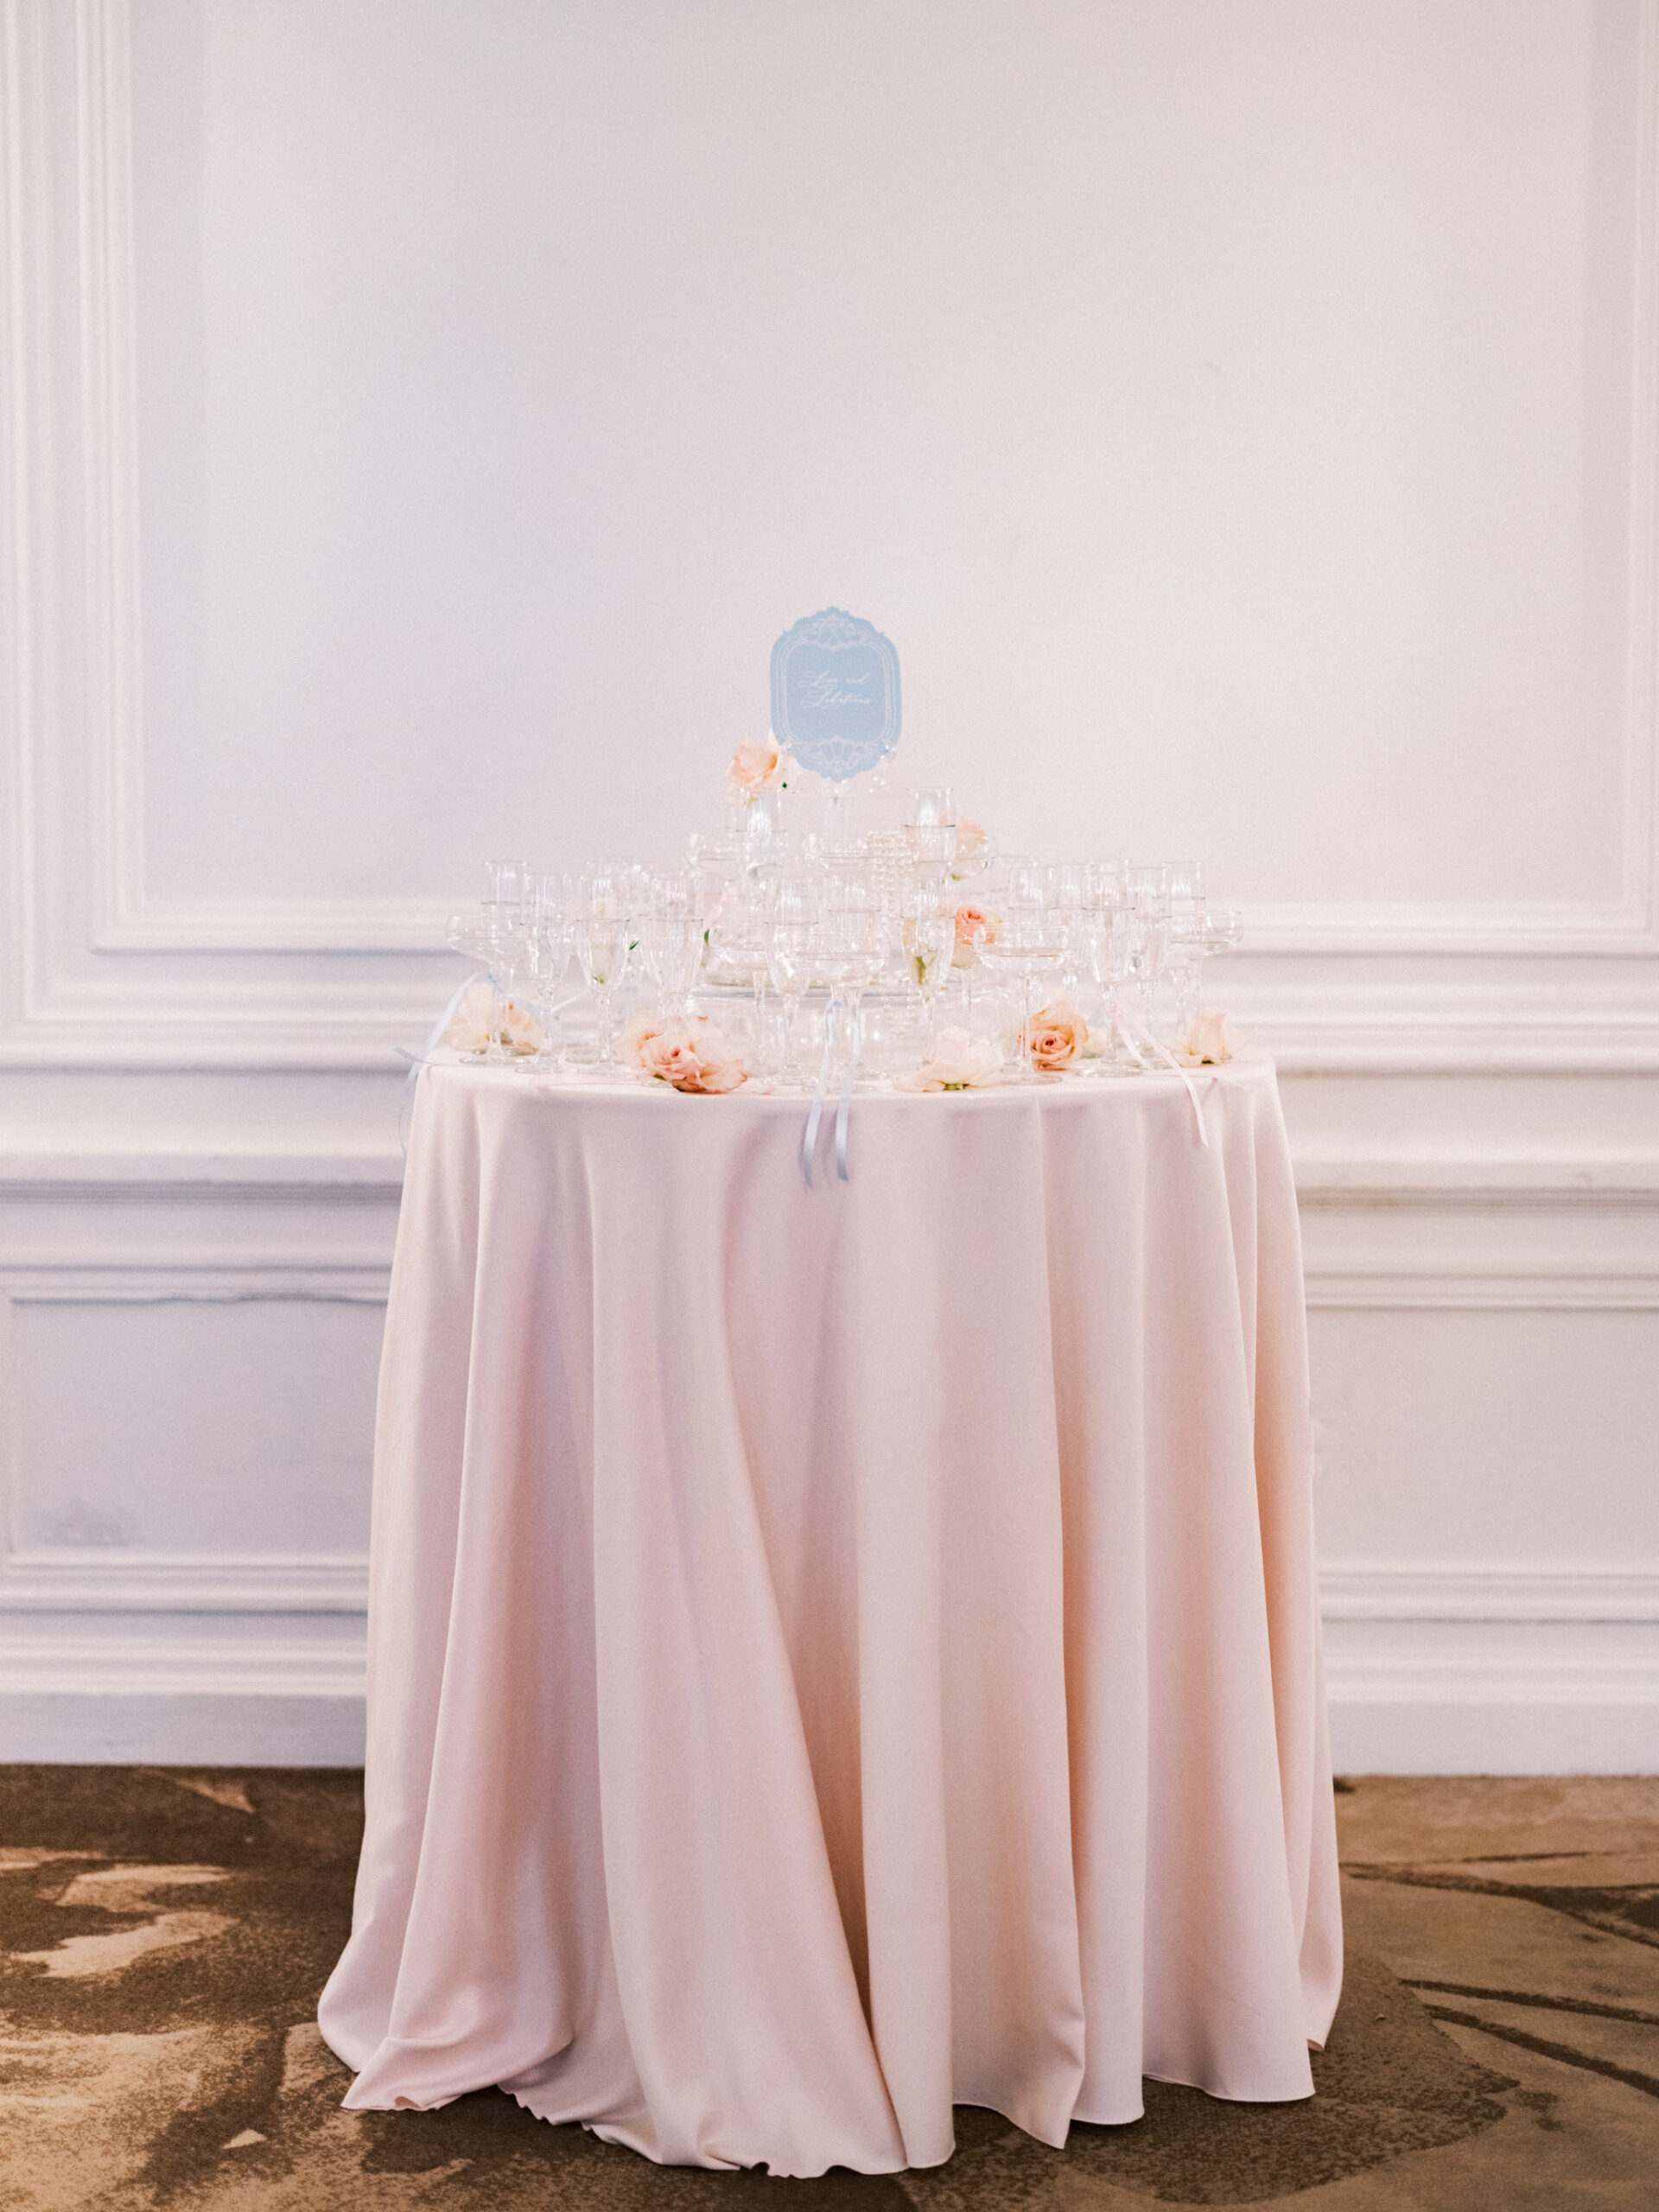 wedding table sign blue, Fairmont Palliser Calgary True to Hue, ballet wedding, ballet themed wedding, bride with ballet shoes, pointe ballet portrait, pointe ballet wedding, ballet inspired wedding day, fairmont weddings, nicole sarah photography, true to hue workshops, bride looking out window, bride in ballet shoes, pink pastel wedding, french pink wedding, best wedding photographers canada, edmonton wedding